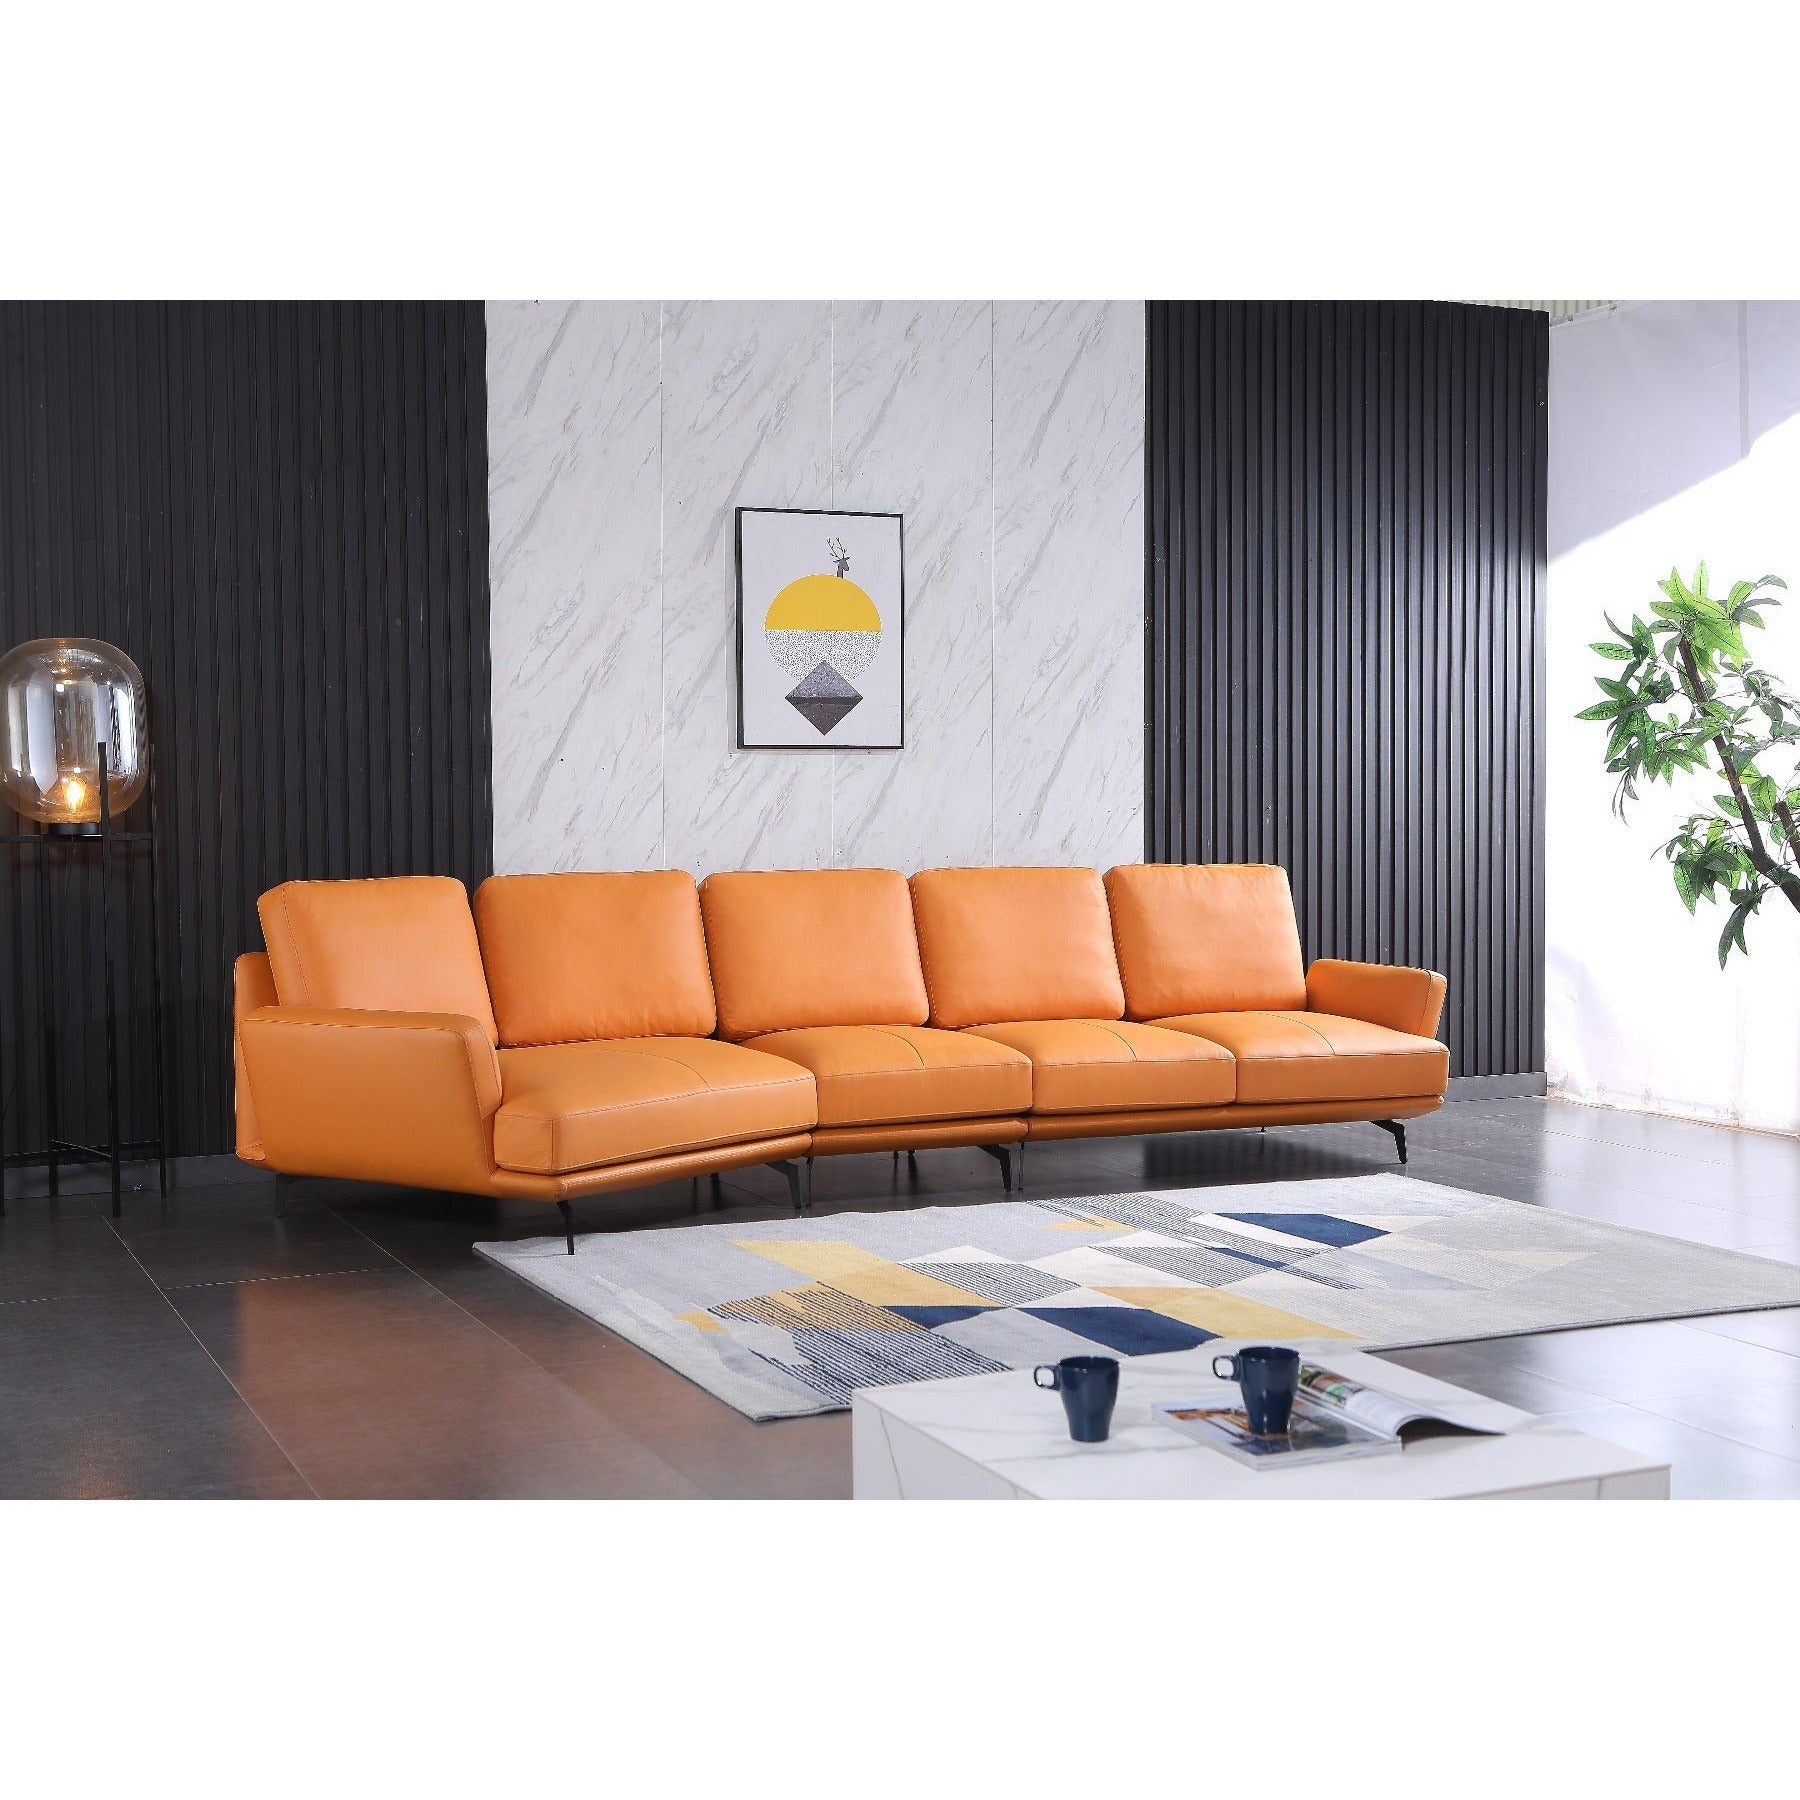 European Furniture - Galaxy Left Hand Chaise Sectional in Smokey Orange - 54431L-3LHC - New Star Living